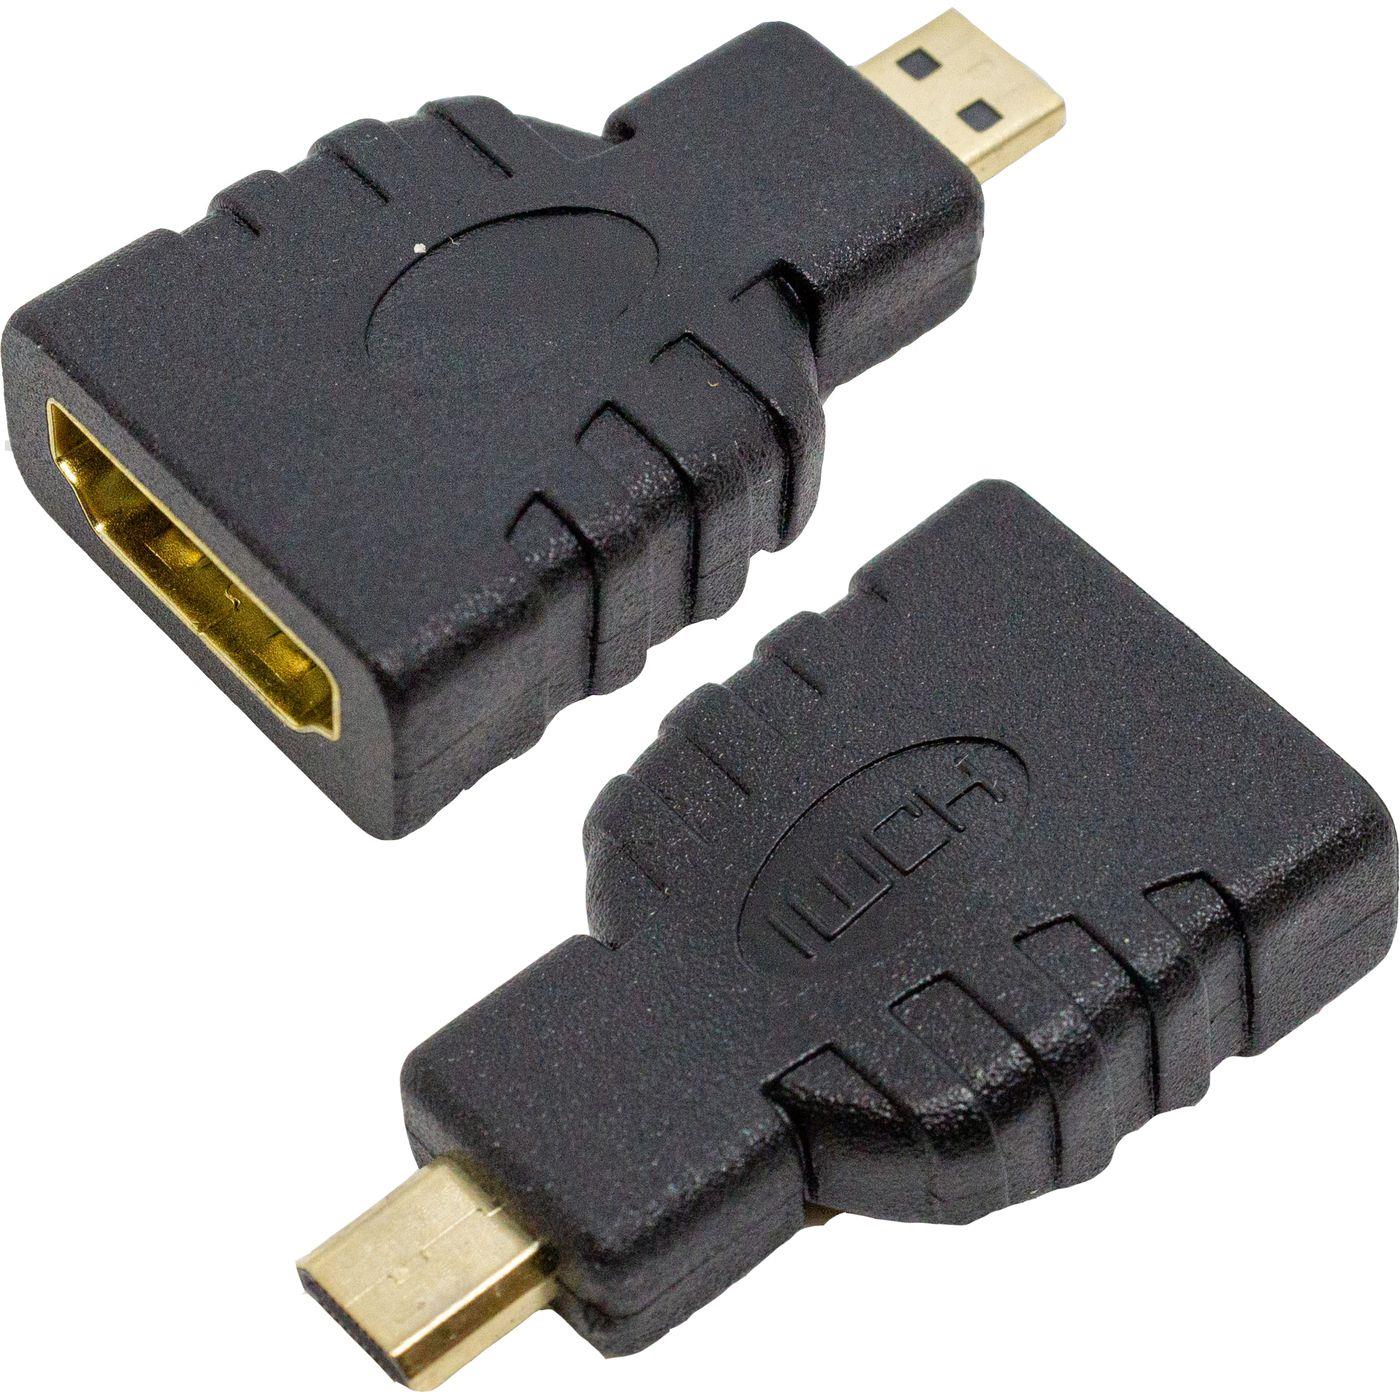 HDMI Adapter Socket to Micro HDMI Plug FULL HD gold plated Contacts for Projector